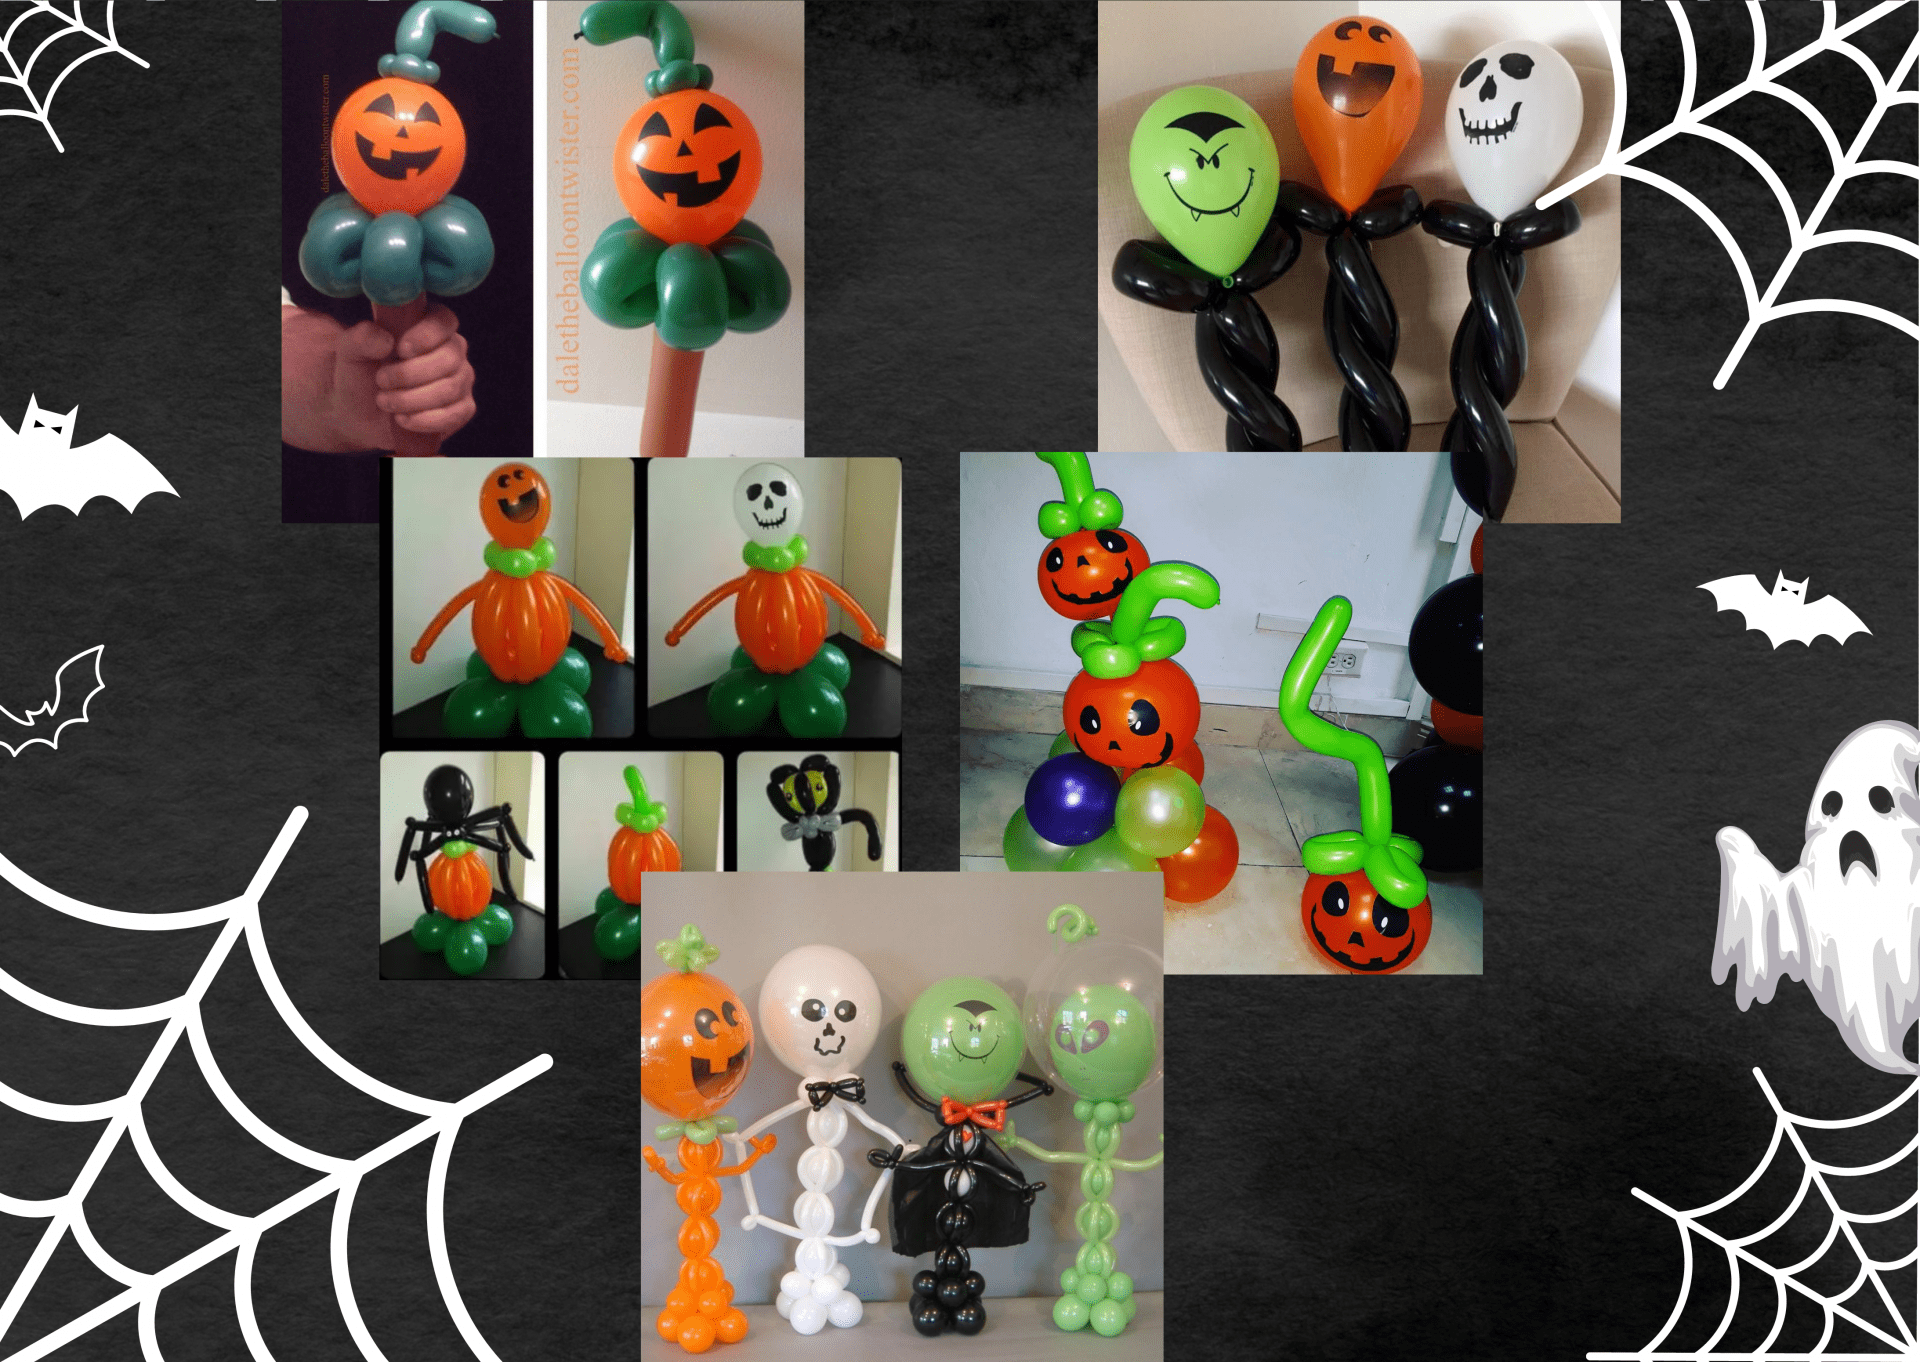 Have a contest for the best balloon sculpture or design.